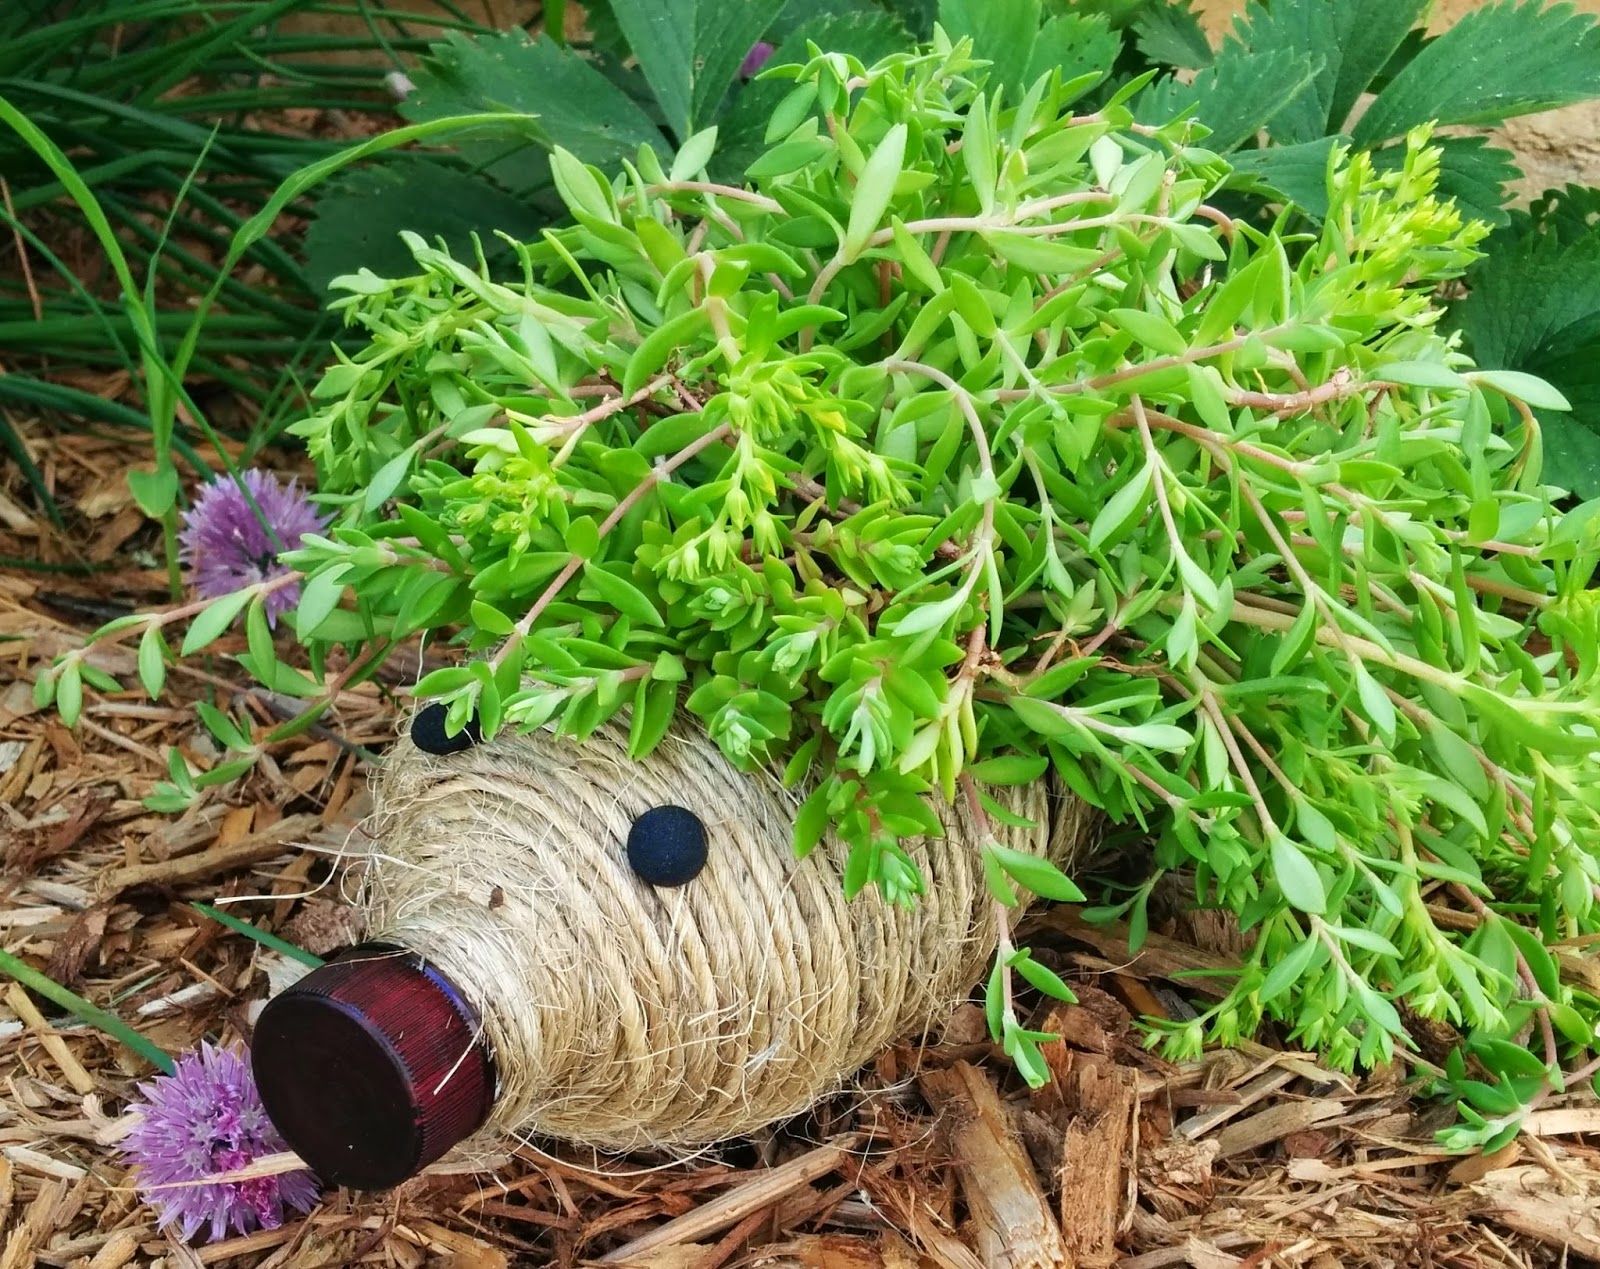 40+ Creative DIY Garden Containers and Planters from Recycled Materials --> DIY Hedgehog Planter from Plastic Bottle